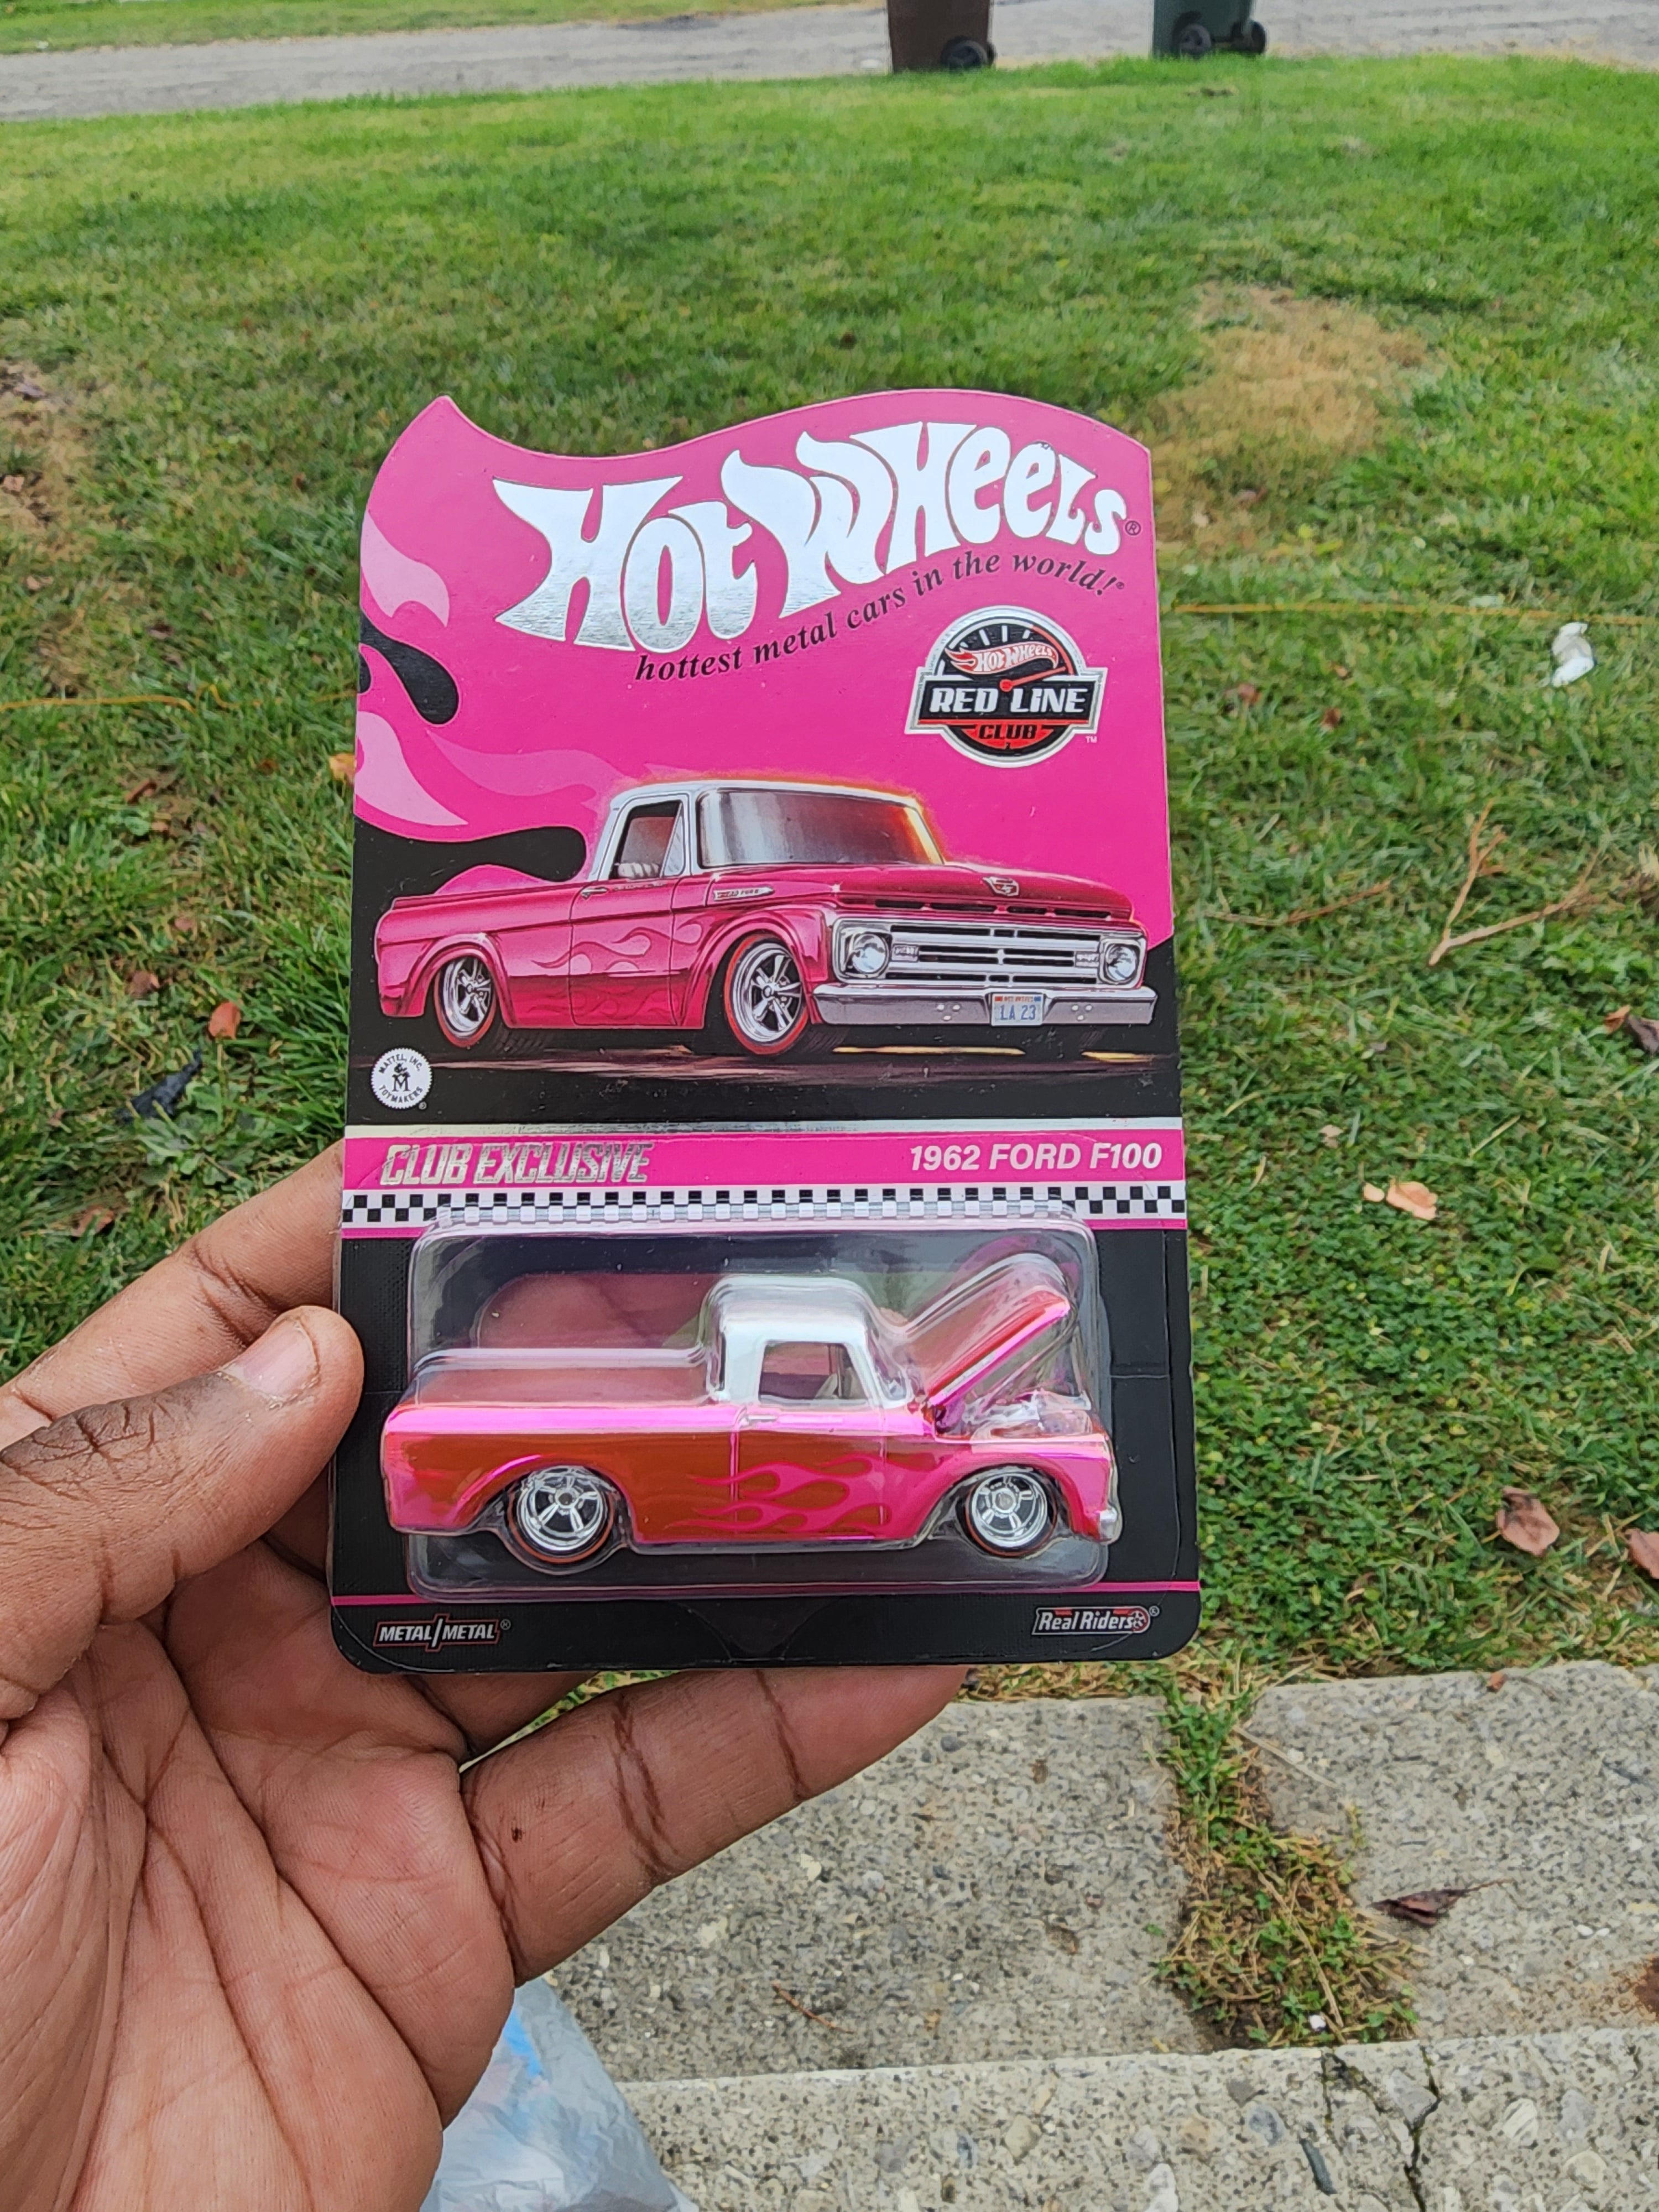 Hot Wheels RLC Exclusive Pink Edition 1962 Ford F100 Truck – Sky ...